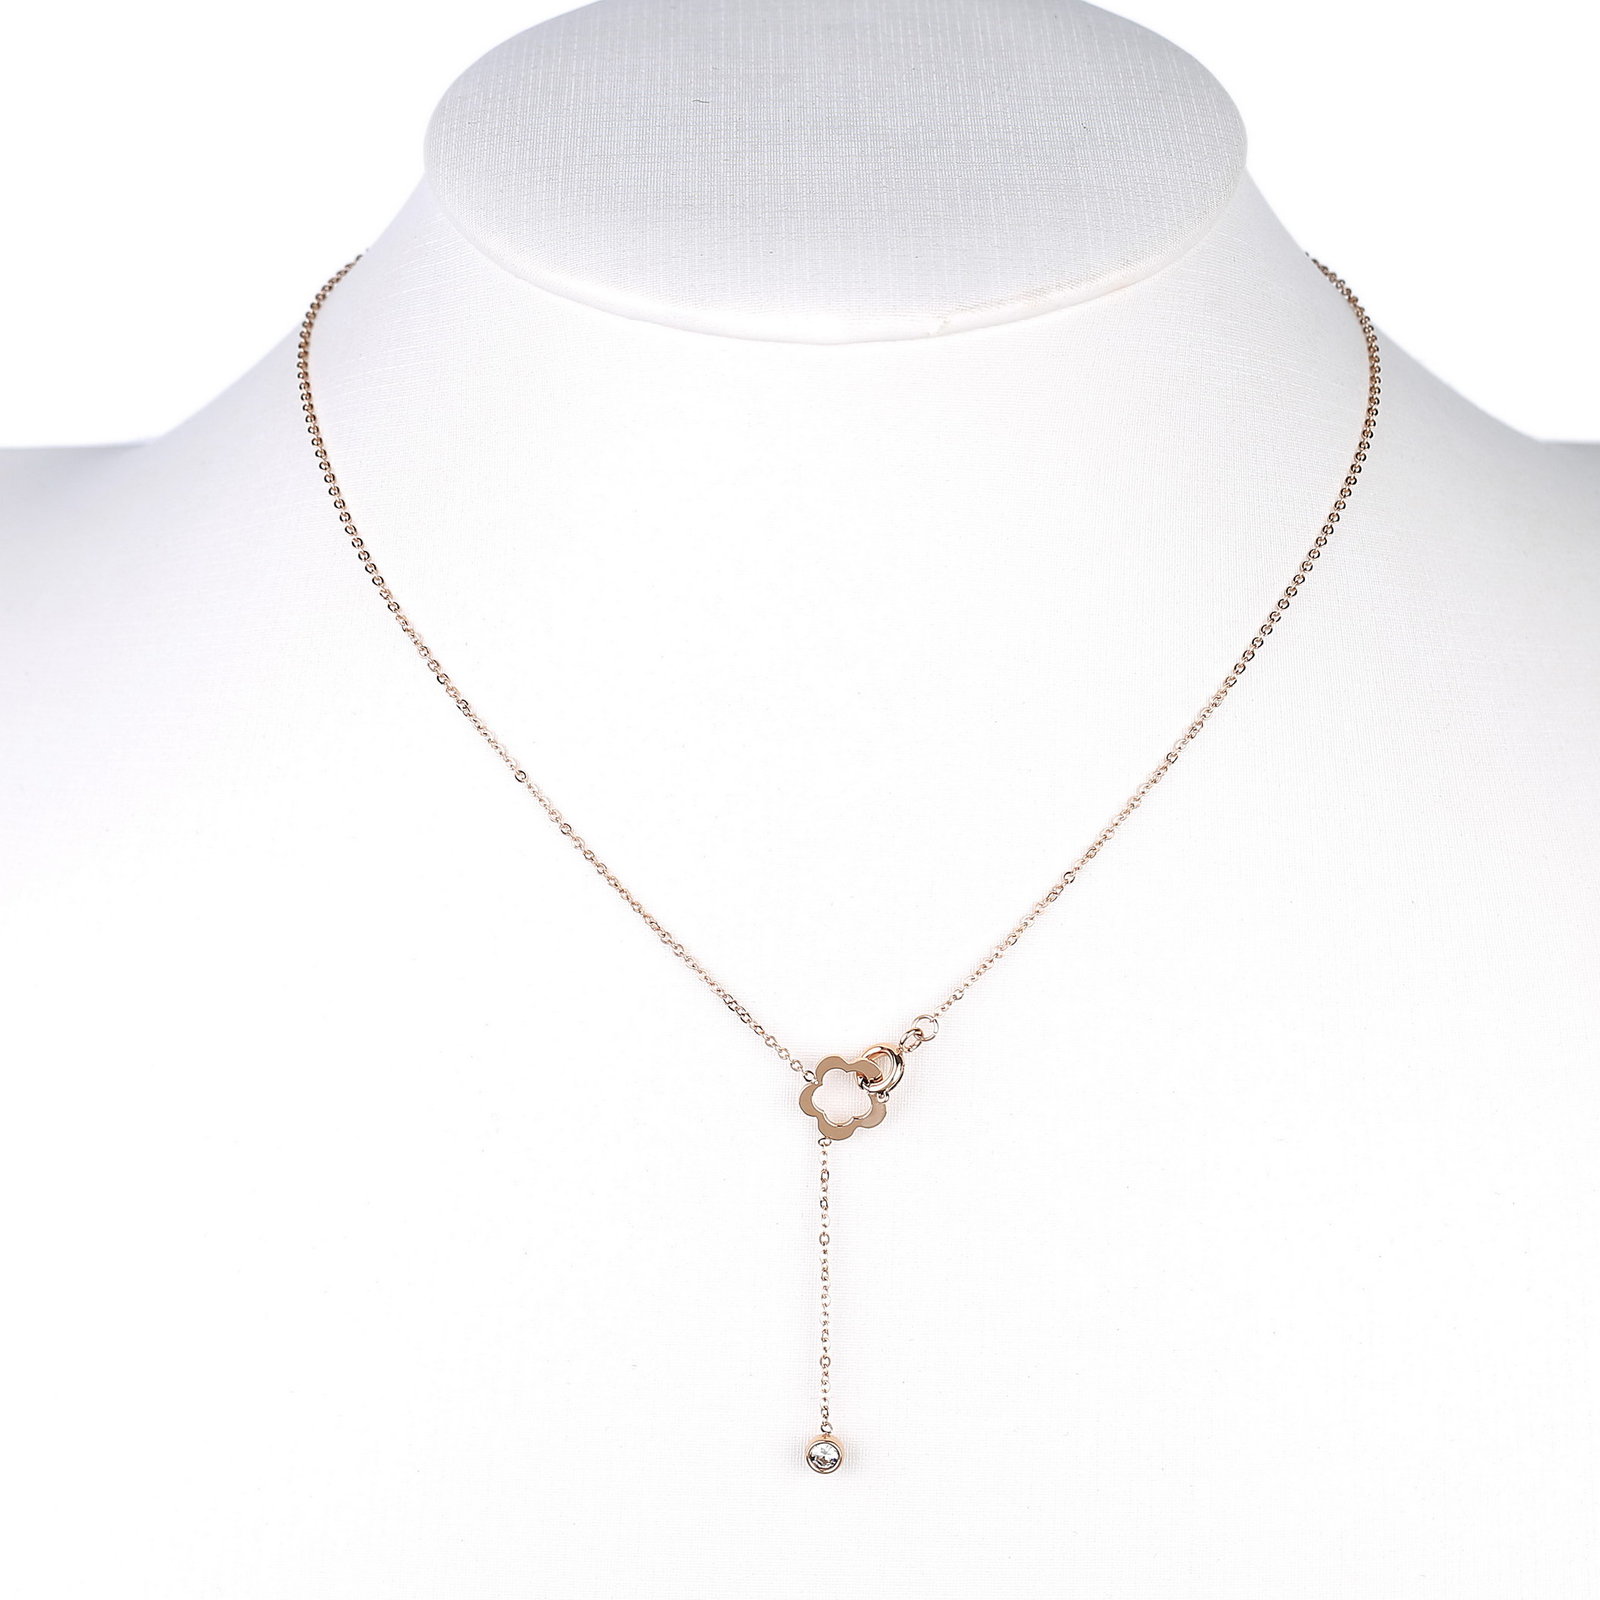 rose gold tone necklace with clover pendant & swarovski style crystal